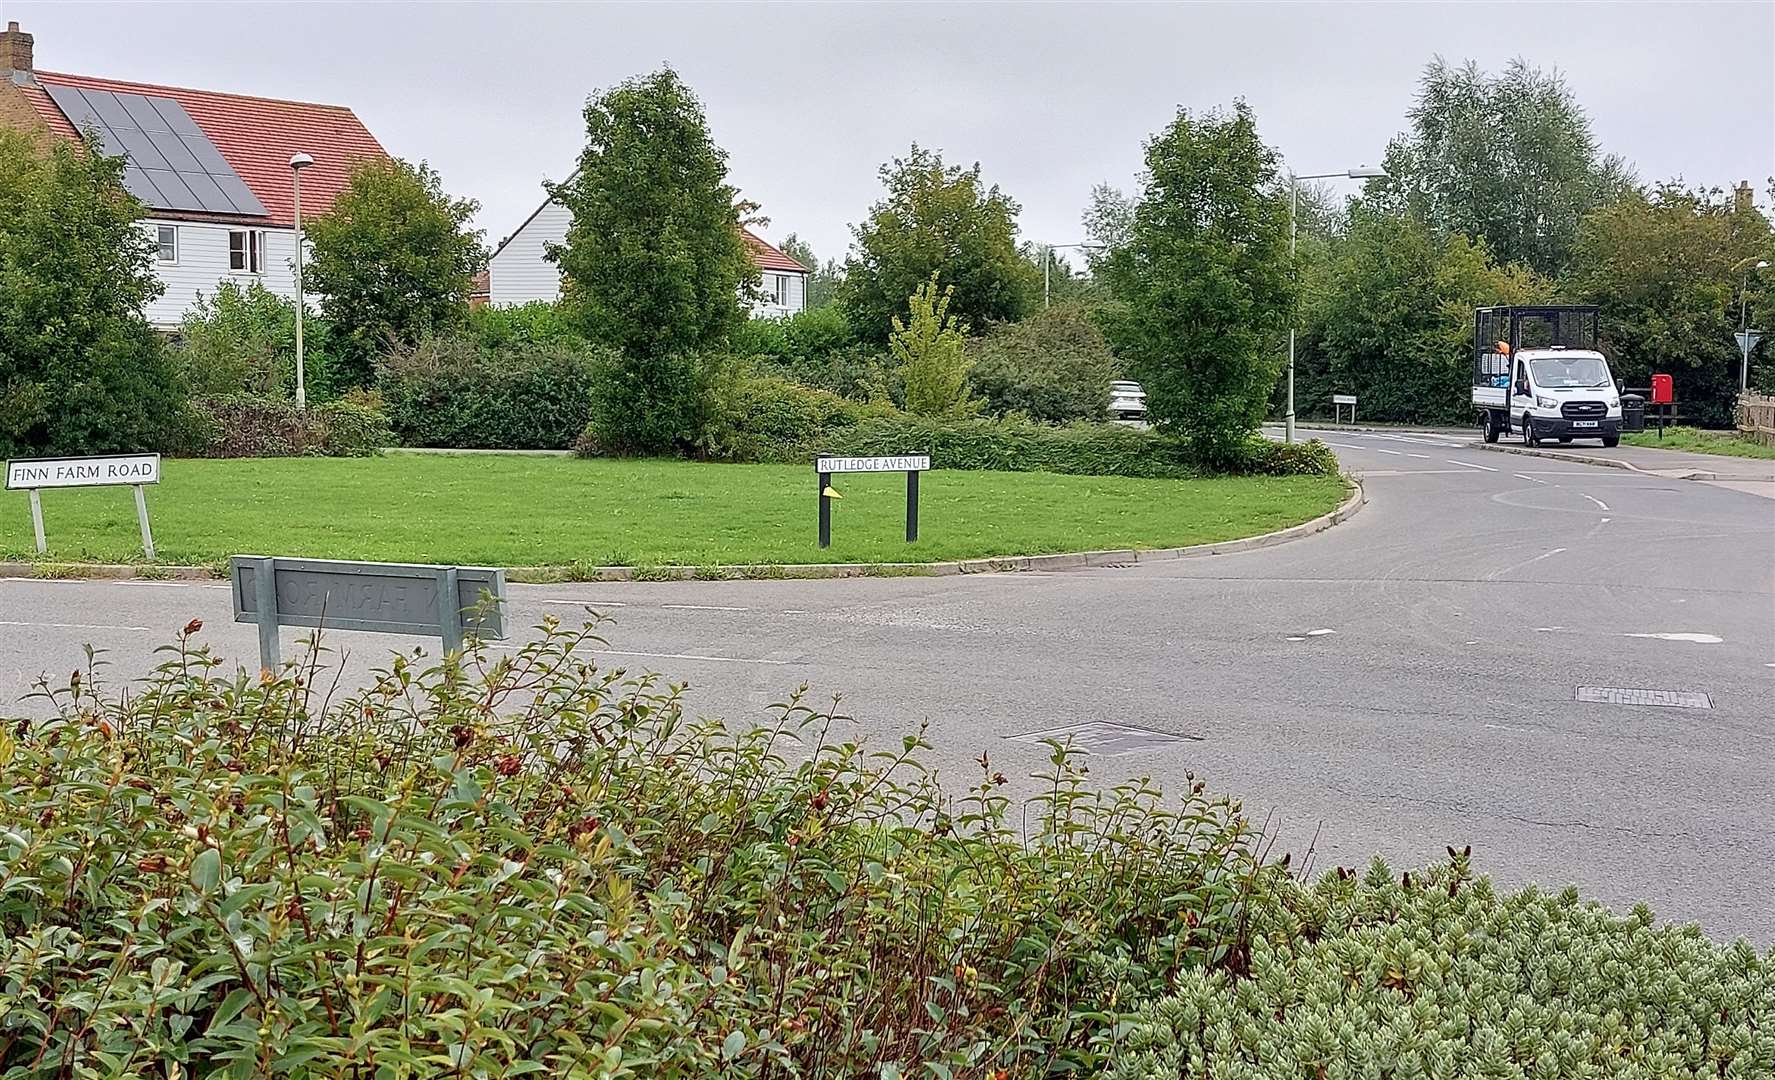 KCC is consulting on plans to close Finn Farm Road, in Bridgefield, from the junction with Brockmans Lane and Rutledge Avenue